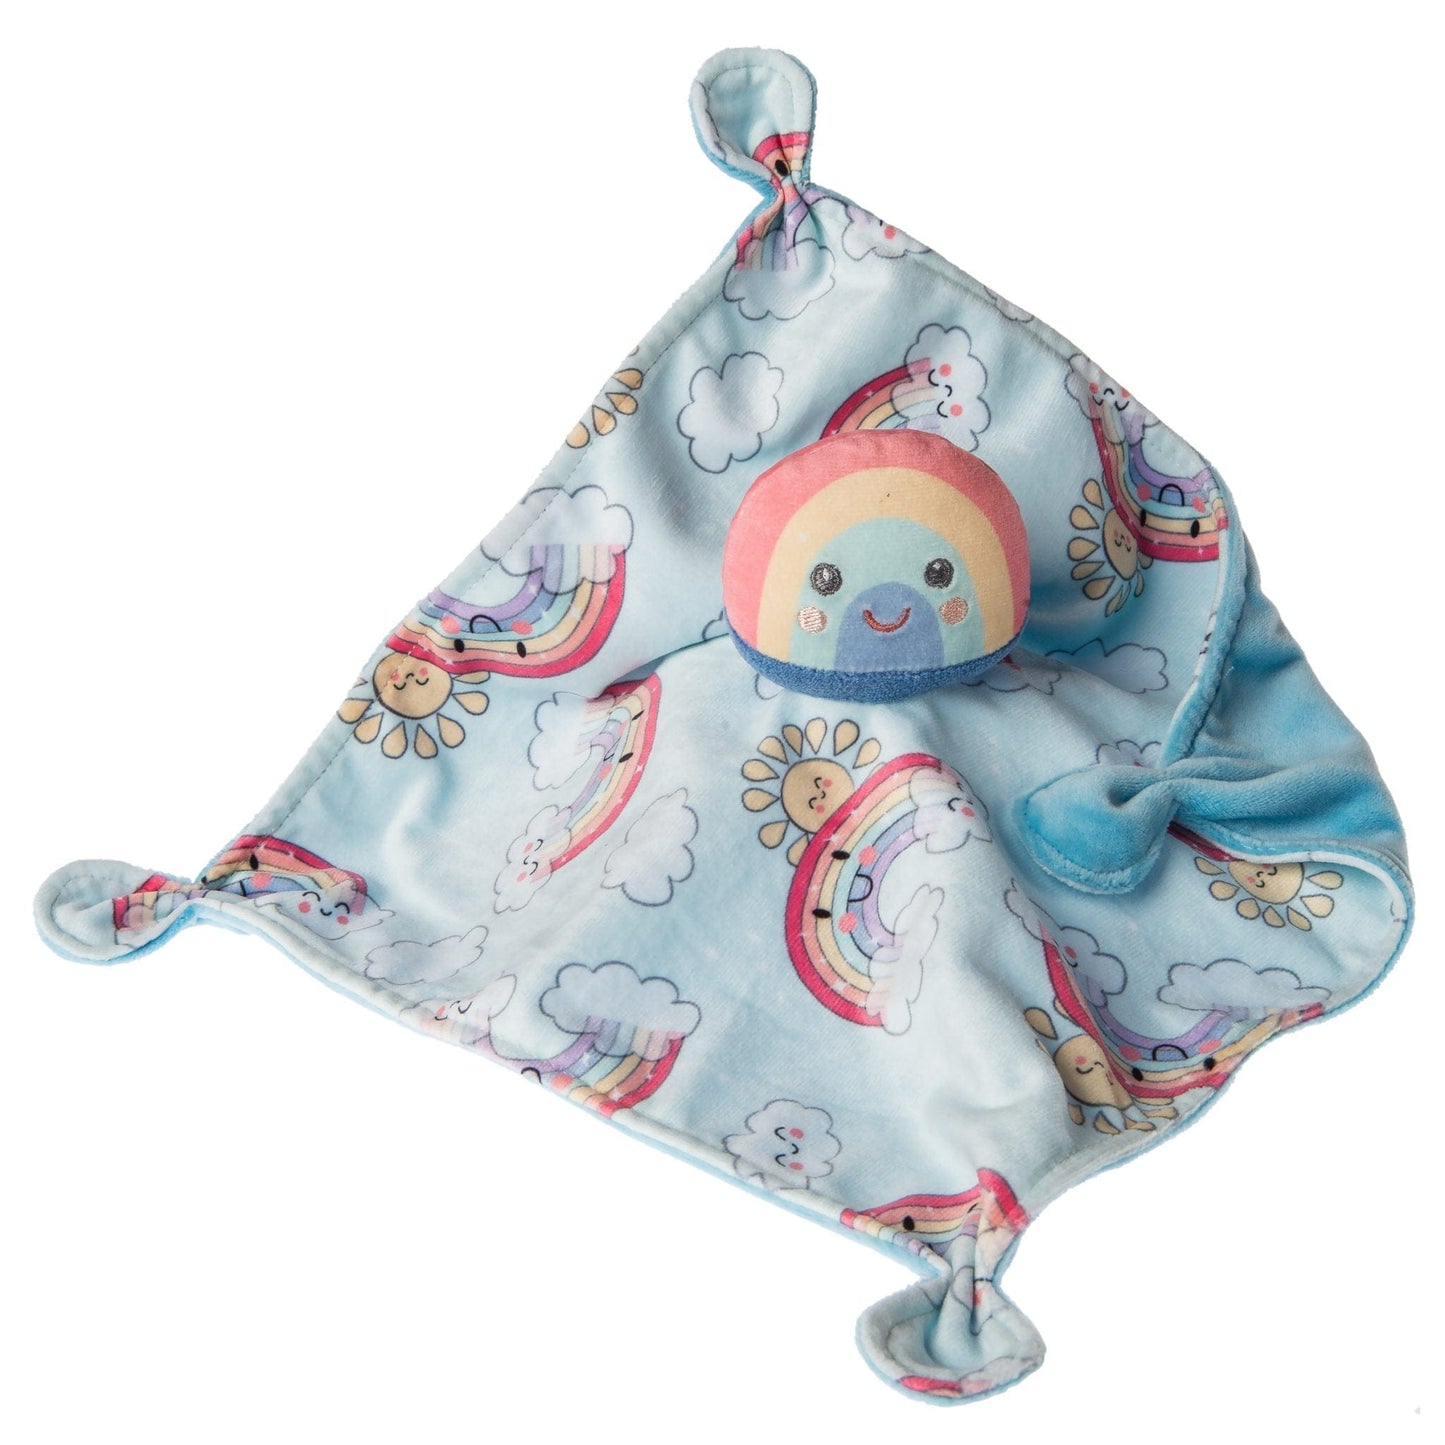 Mary Meyer Sweet Soothie Rainbow Blanket Mary Meyer Sweet Soothie Rainbow Blanket 